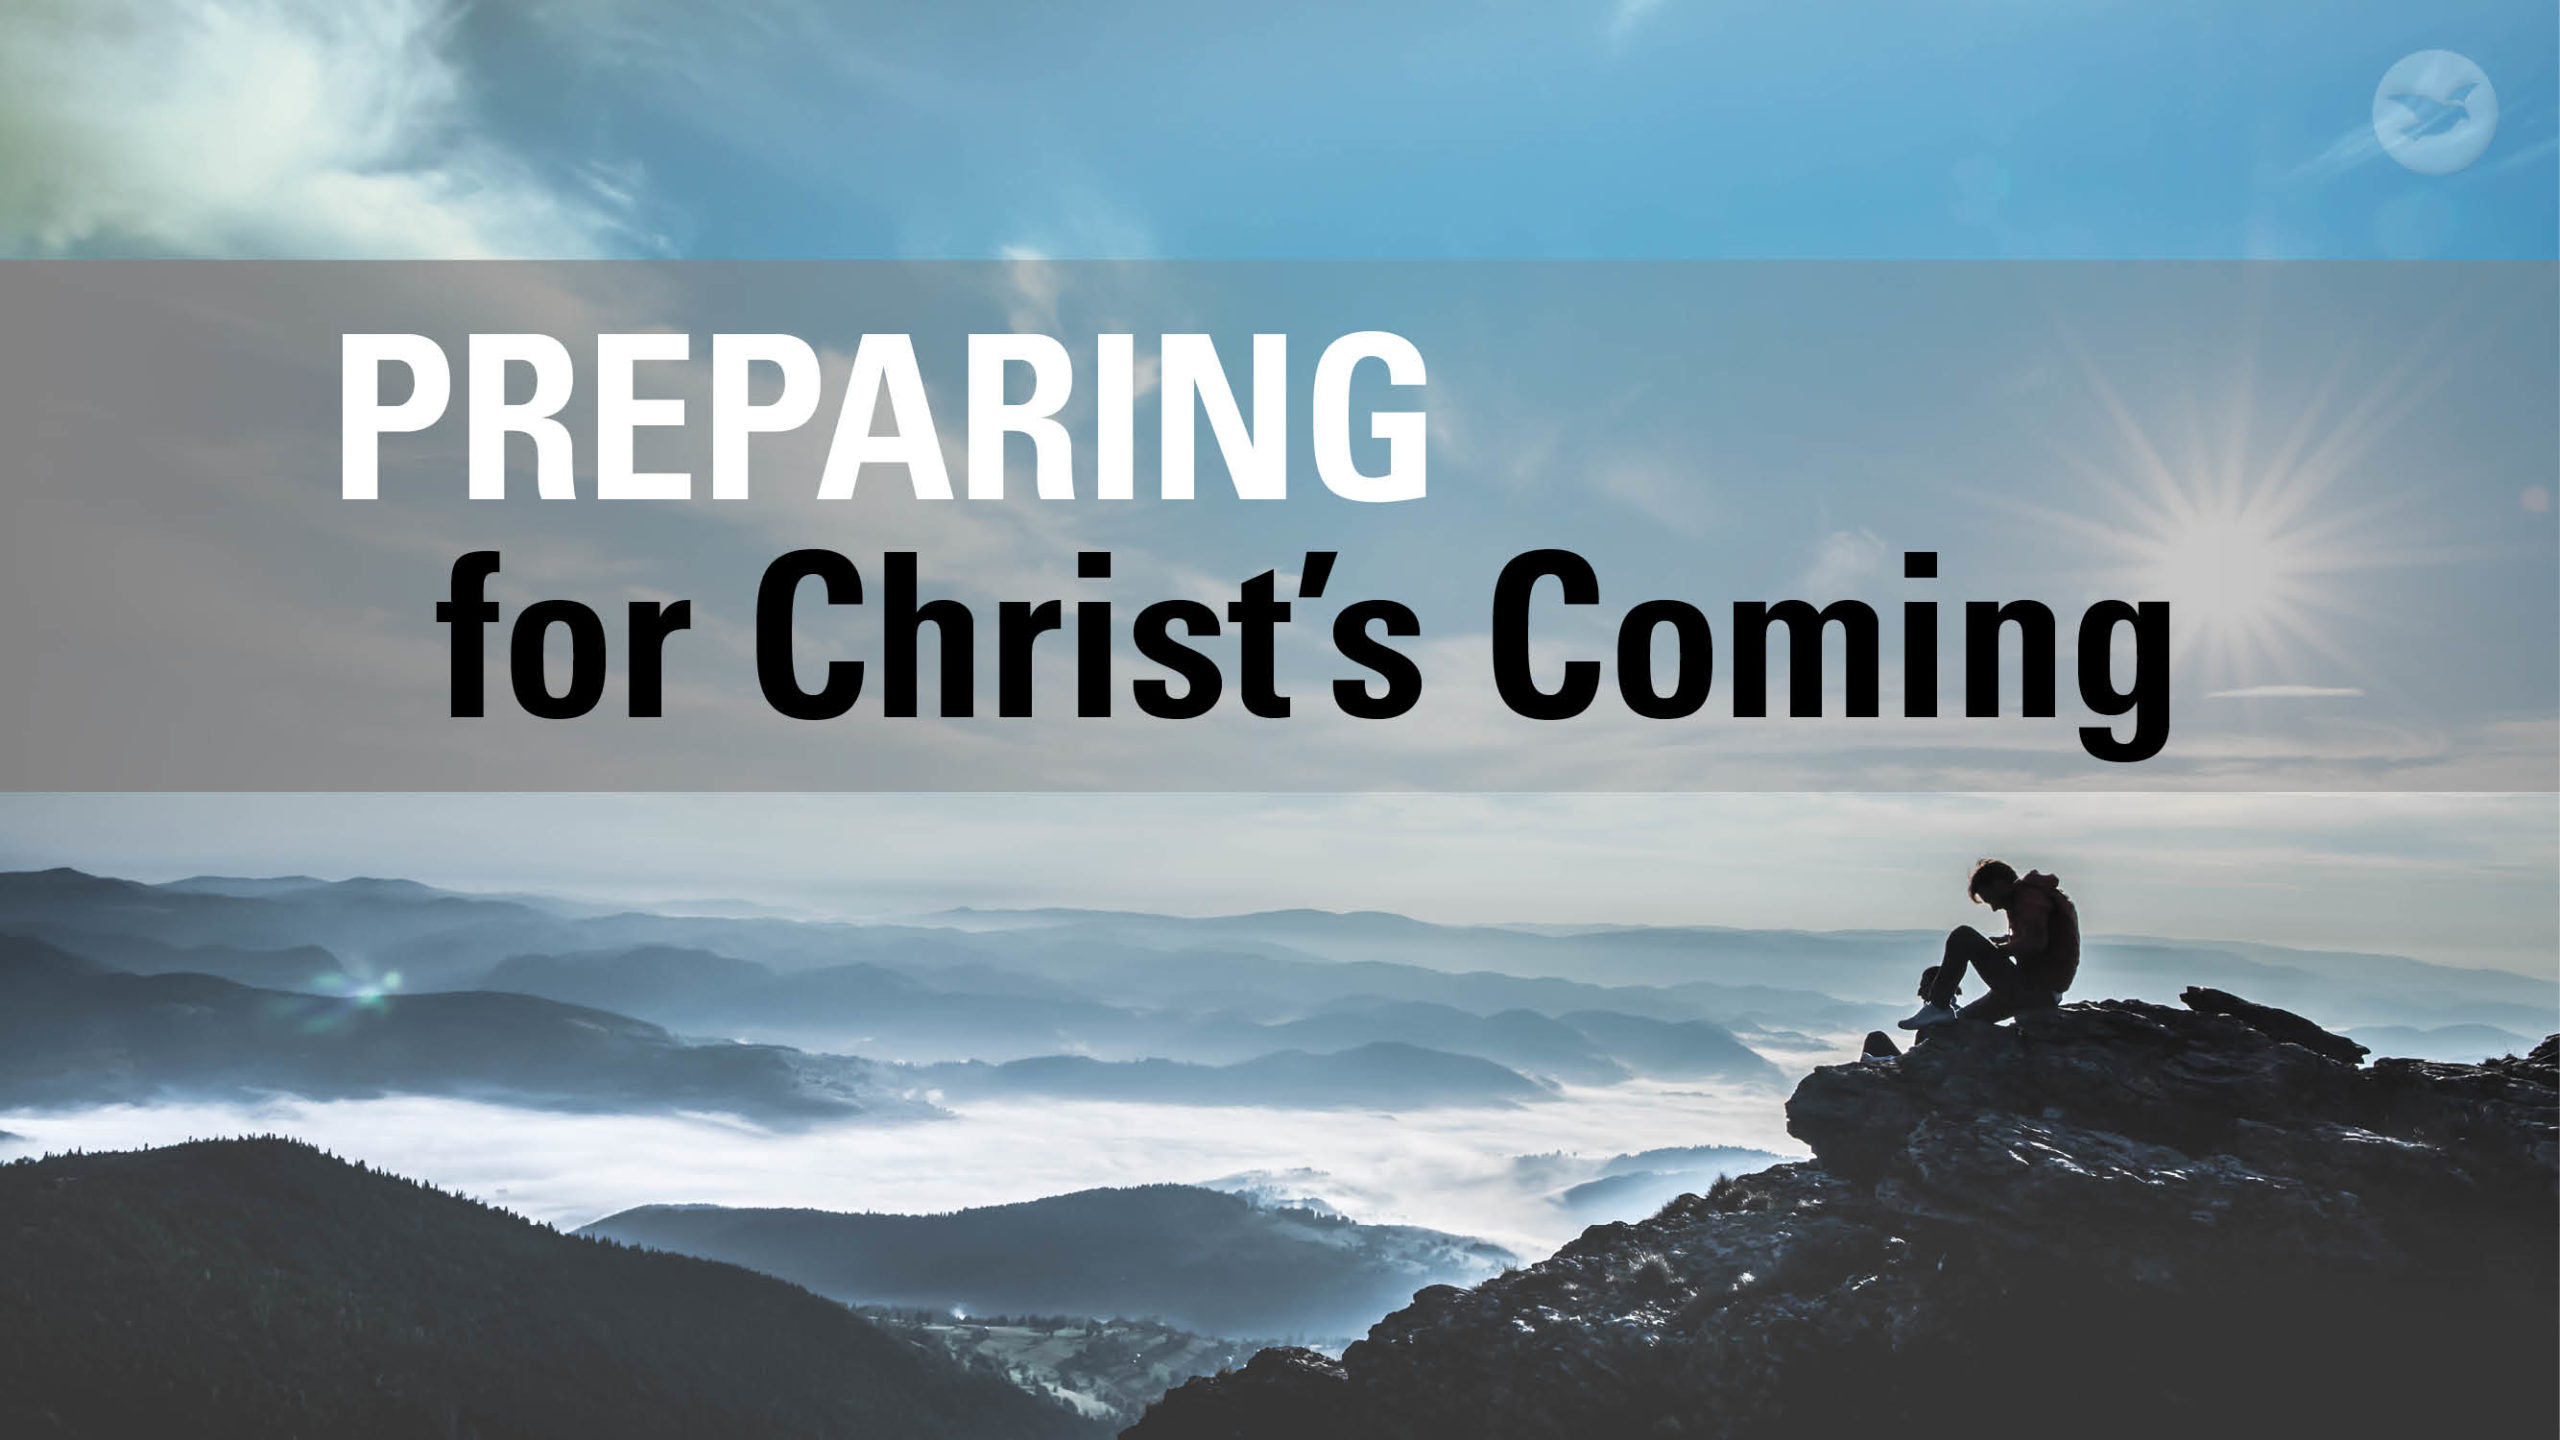 Are you ready to meet the Lord Jesus when He comes? How can we be ready for and be confident at His coming?